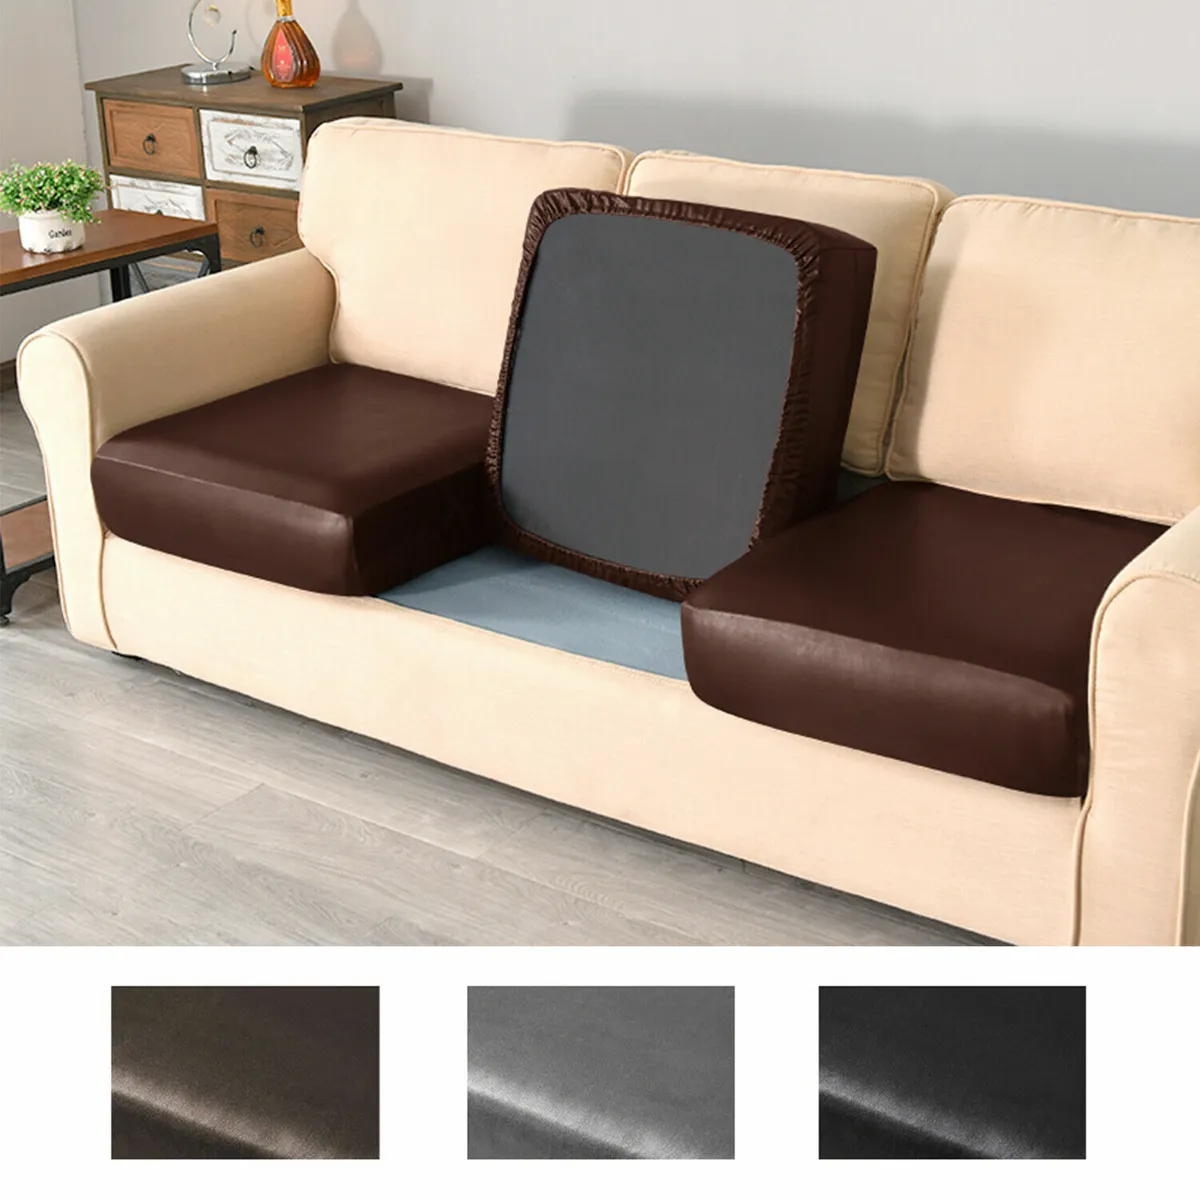 cover for a leather couch